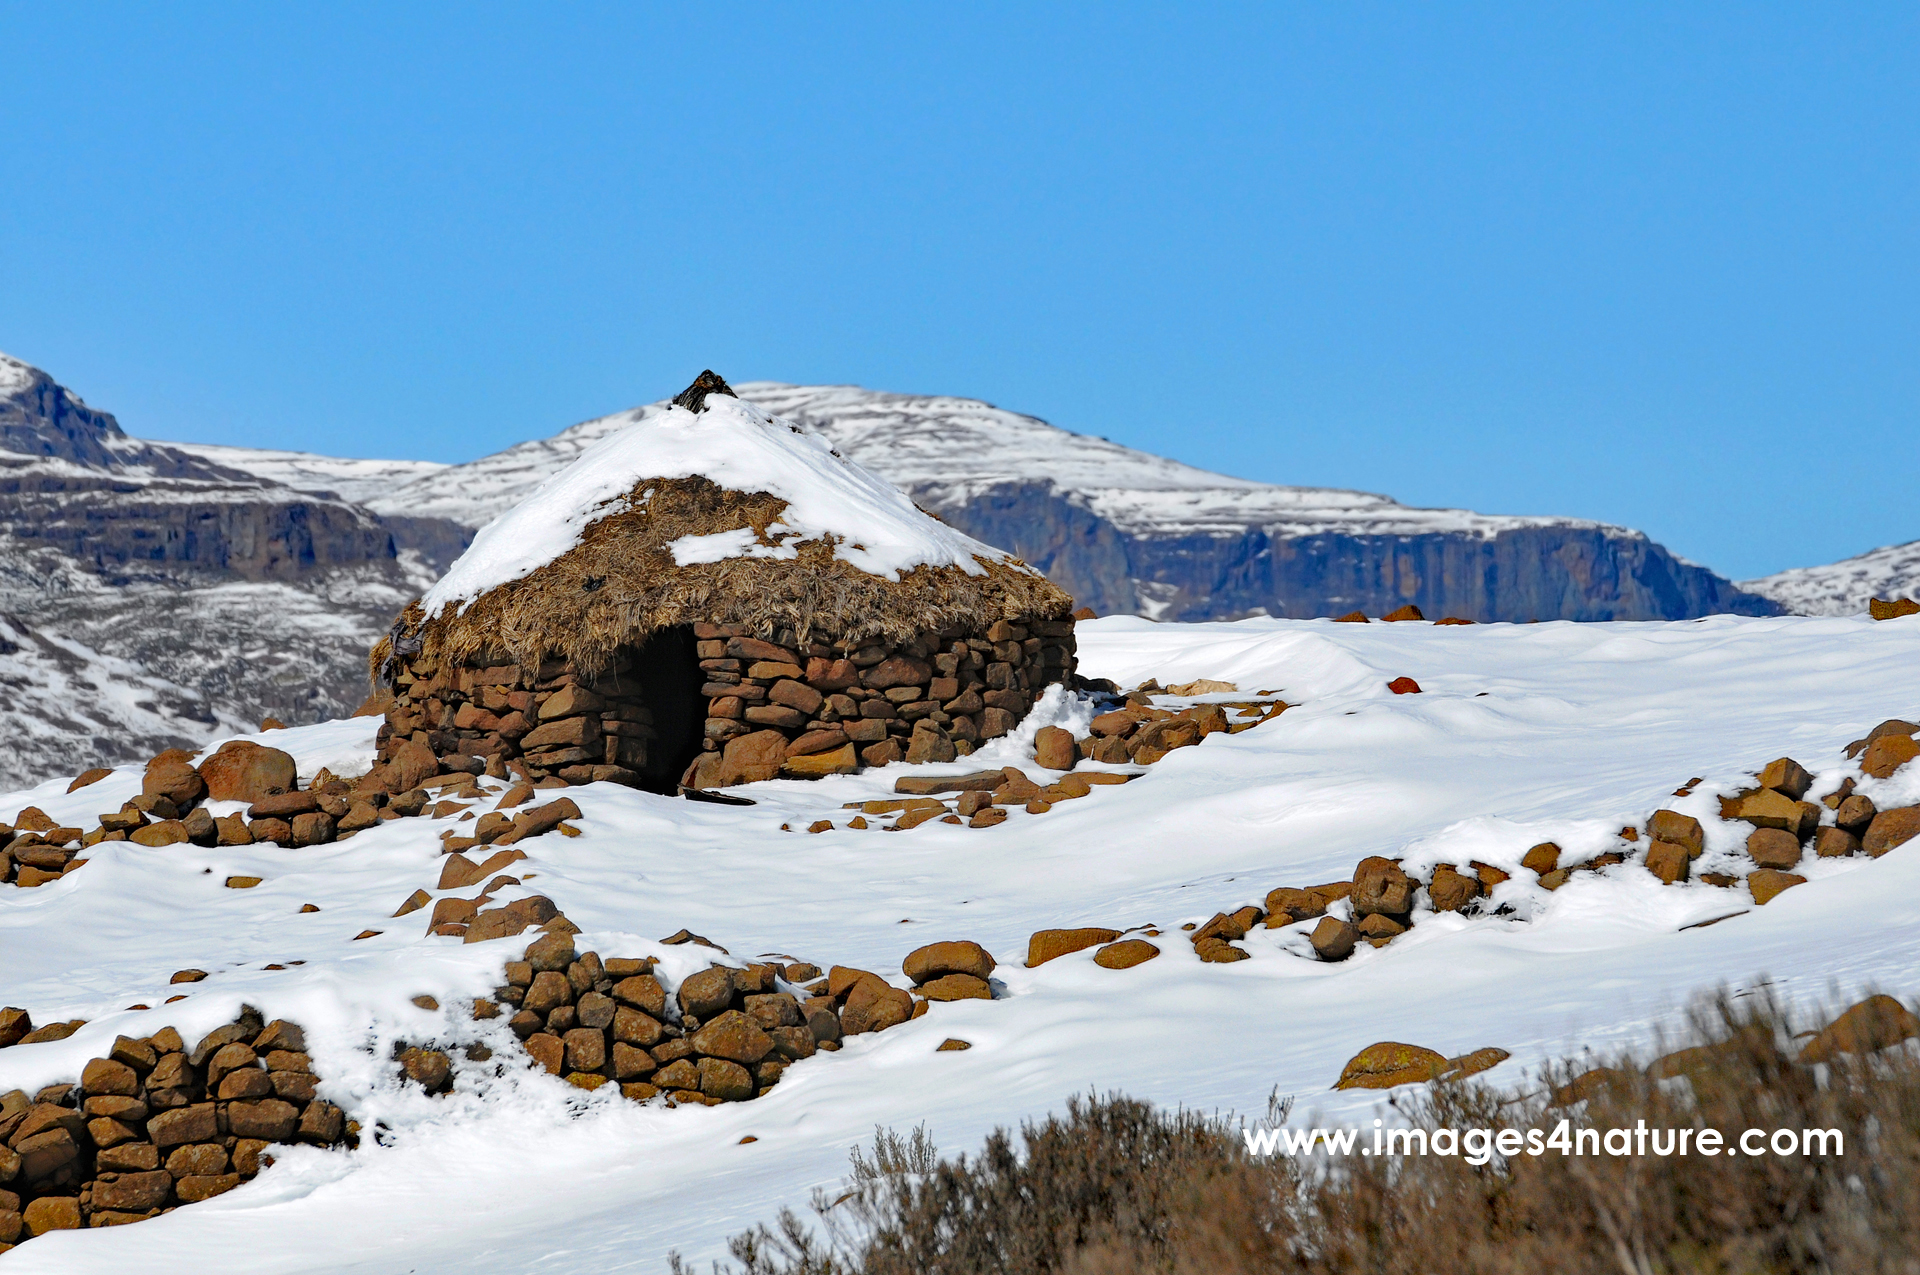 Typical Lesotho round stone house located in a remote snow covered mountain area